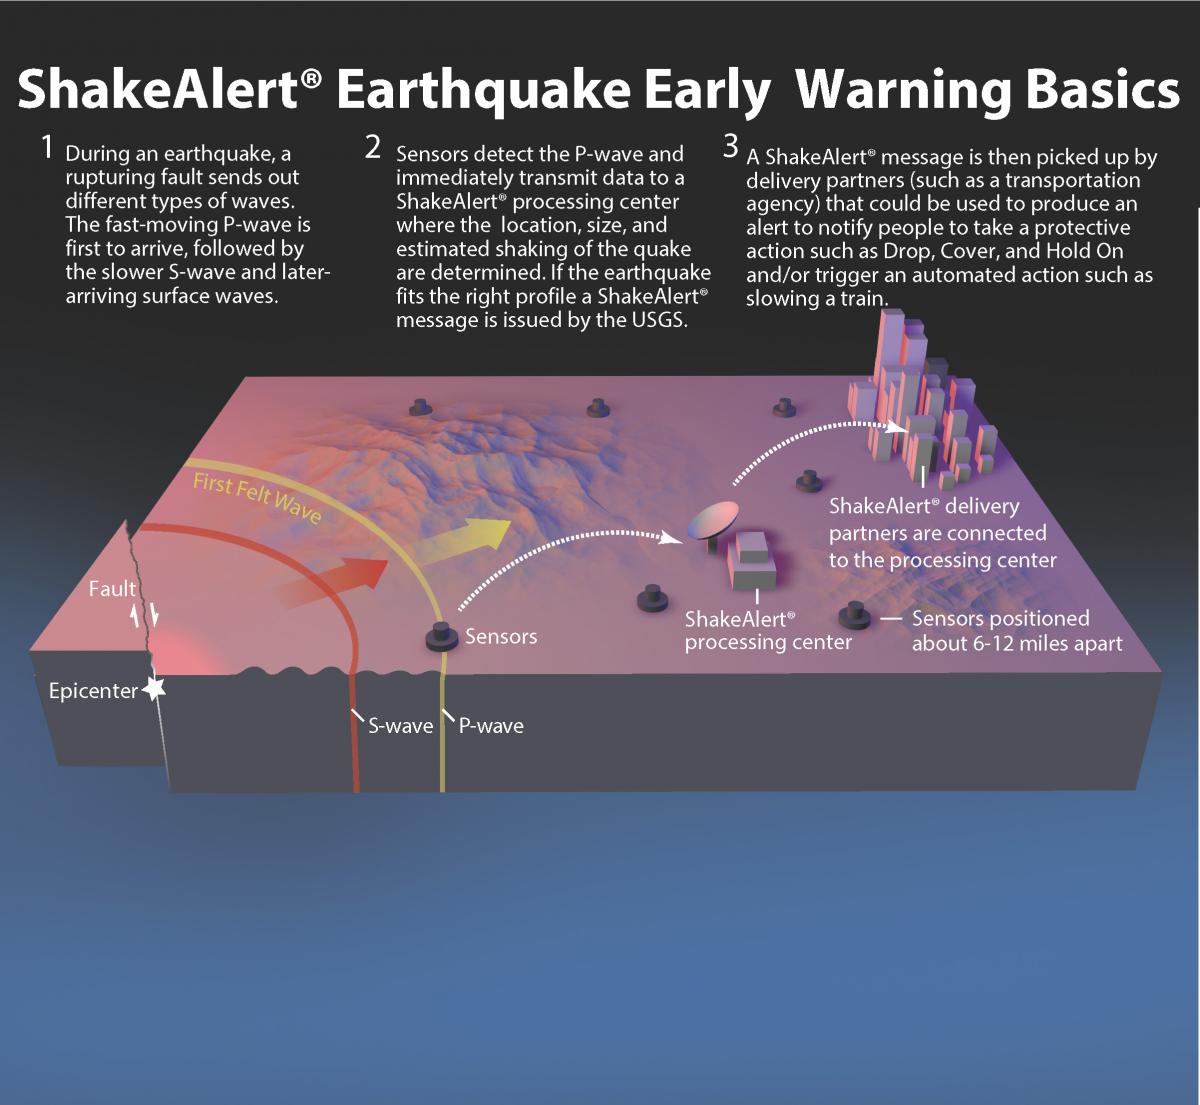 Detailed Description Earthquake early warning systems like ShakeAlert® work because an alert can be transmitted almost instantan